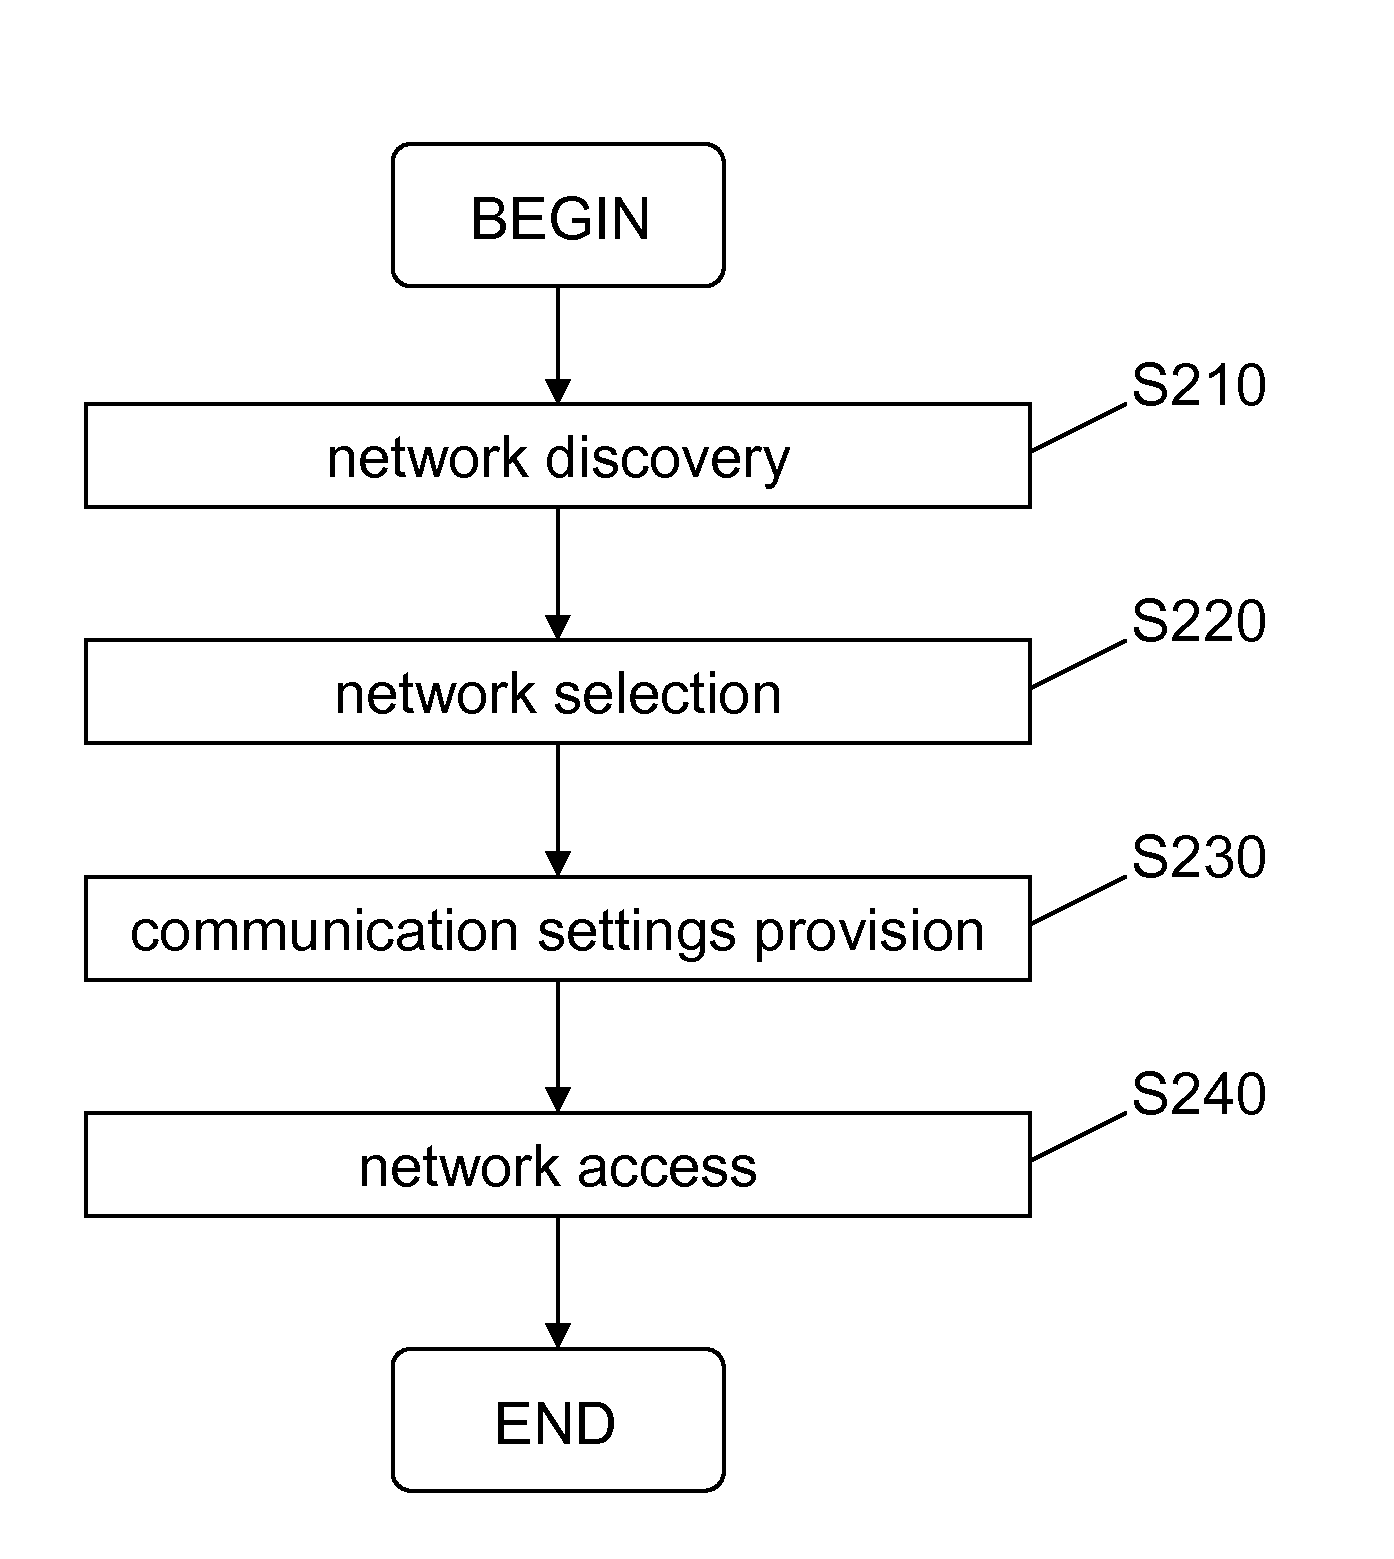 Network discovery and selection